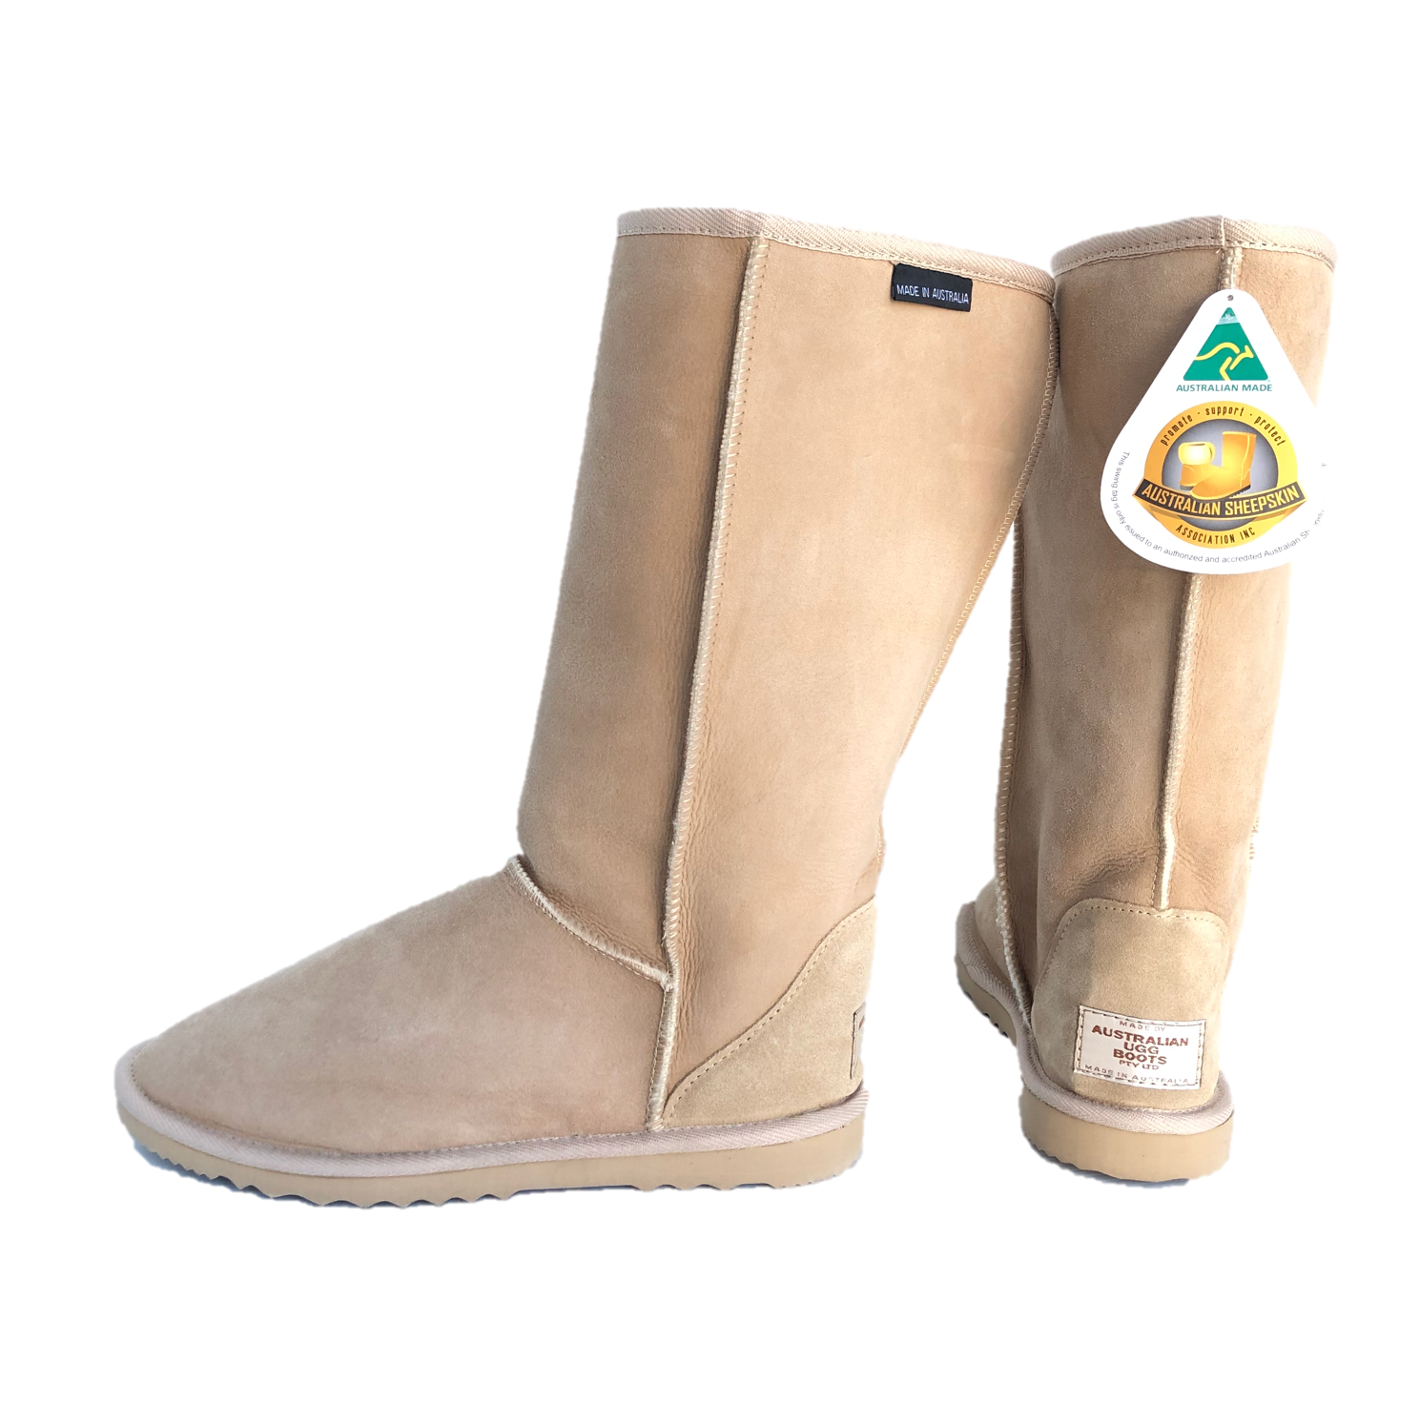 Clearance Classic Tall Boots in Sand. Women's AU9